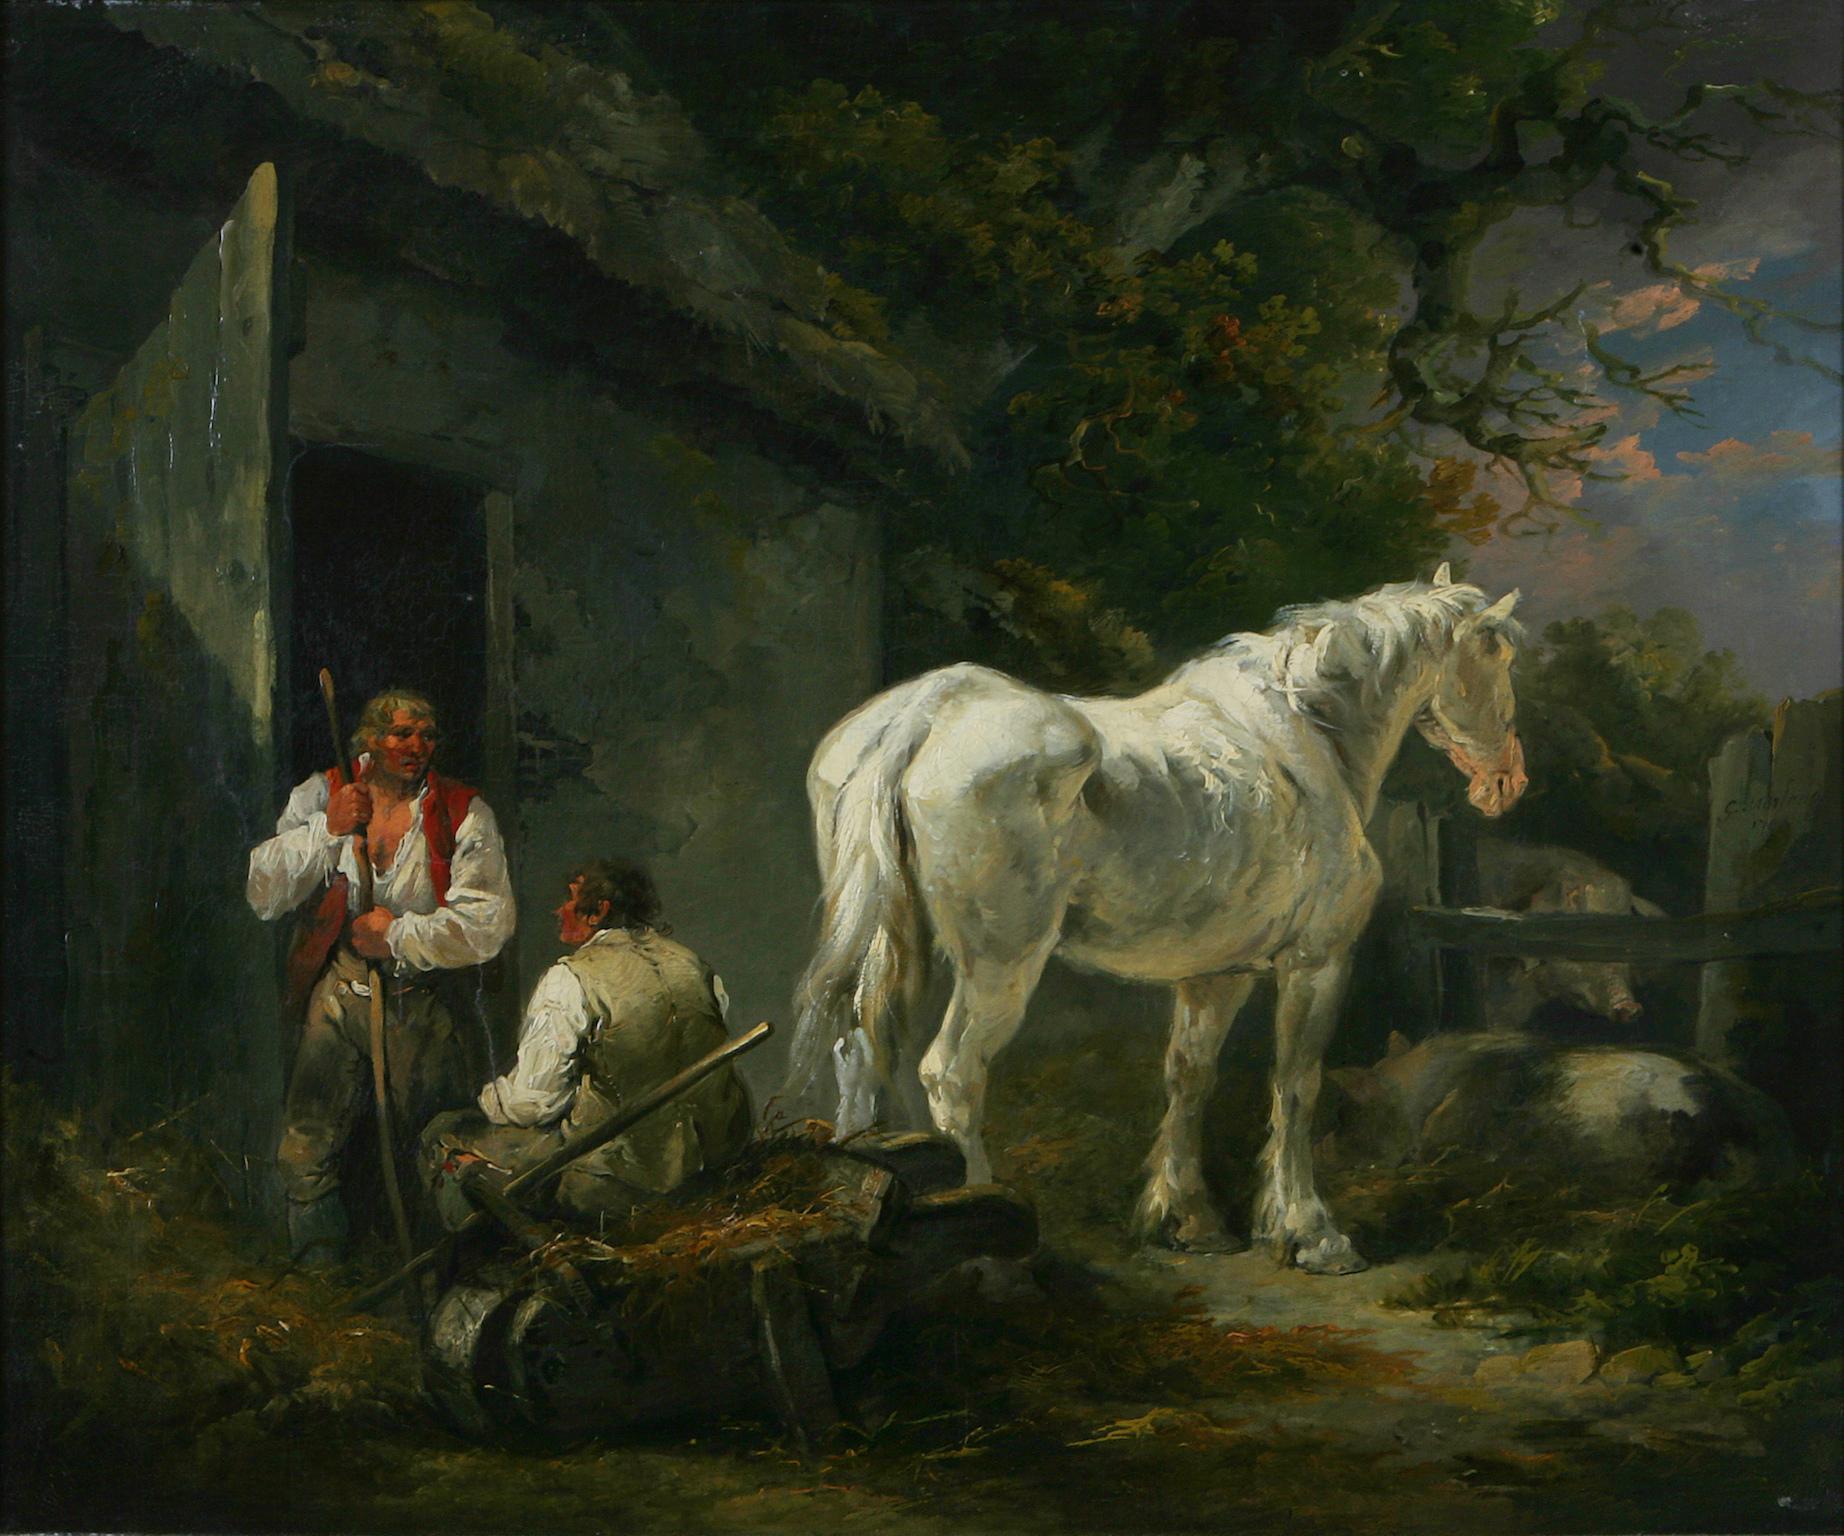 The White Horse An English Genre Painting by George Morland 18th Century